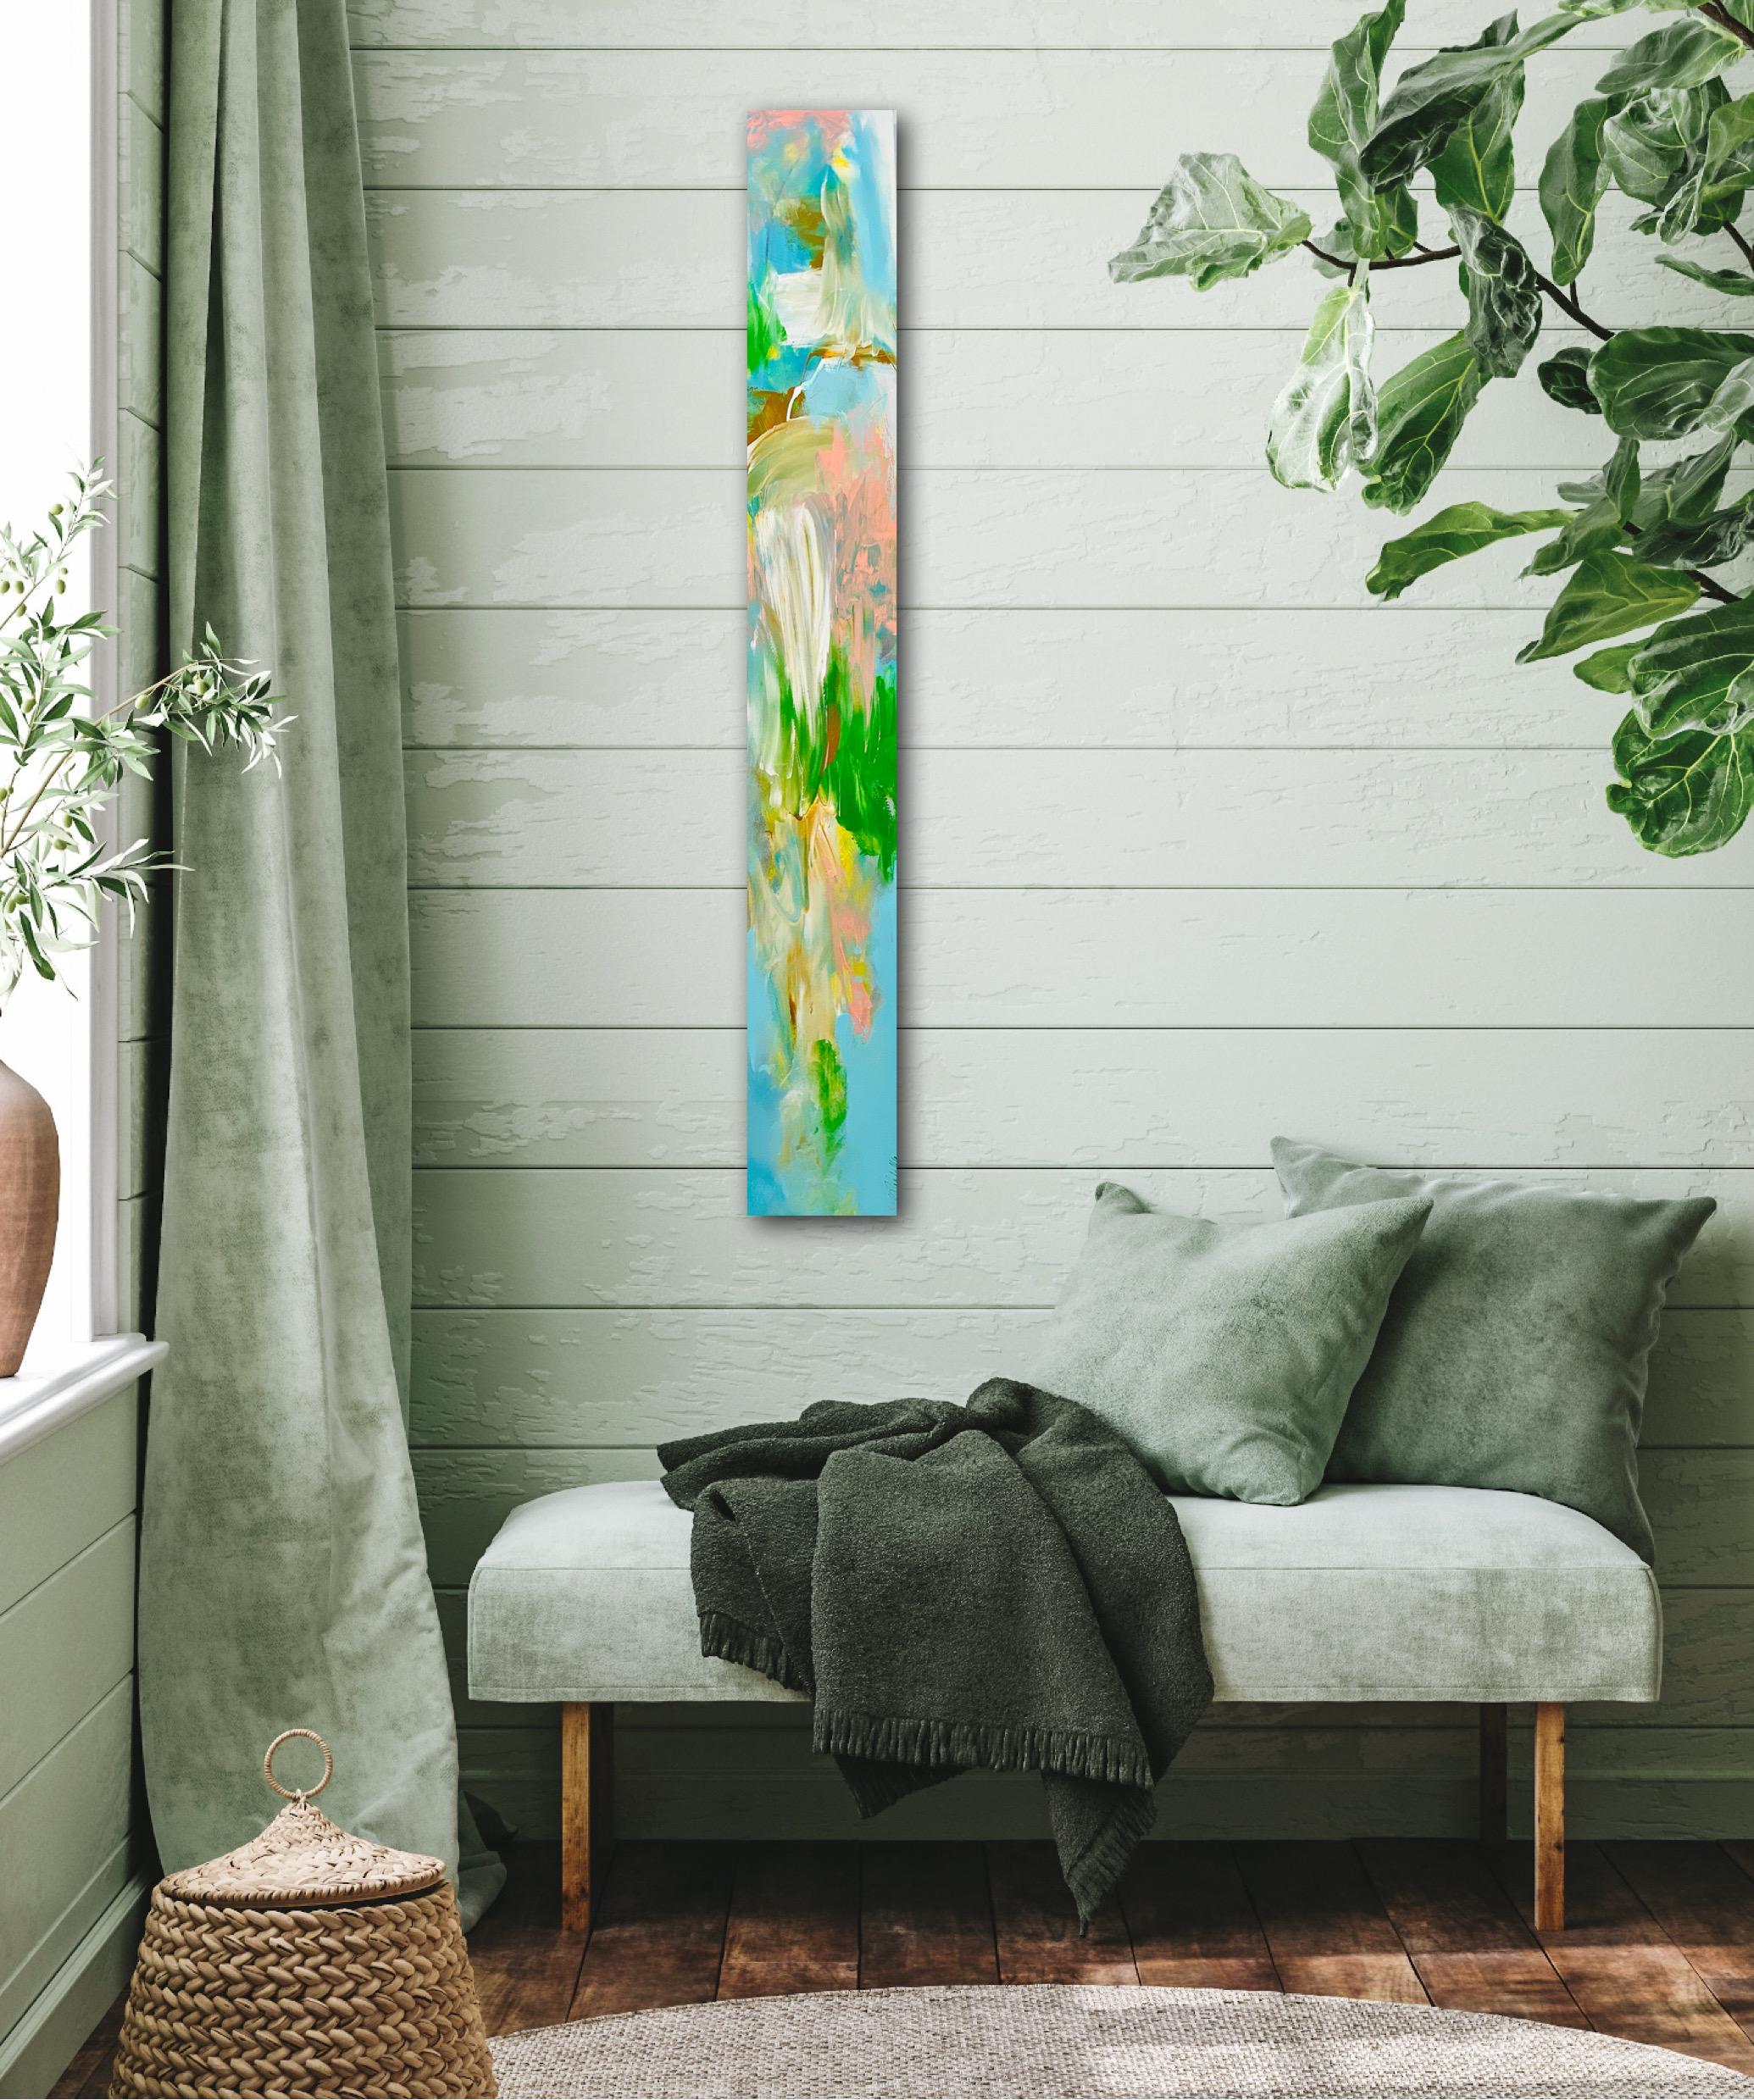 Artist Motivation:

This lovely piece feels like spring, hope, harmony and renewal!

Hang this piece in your favorite reading nook; flank it on either side of a beautiful scenic window, or place it above your most cozy tea or coffee drinking